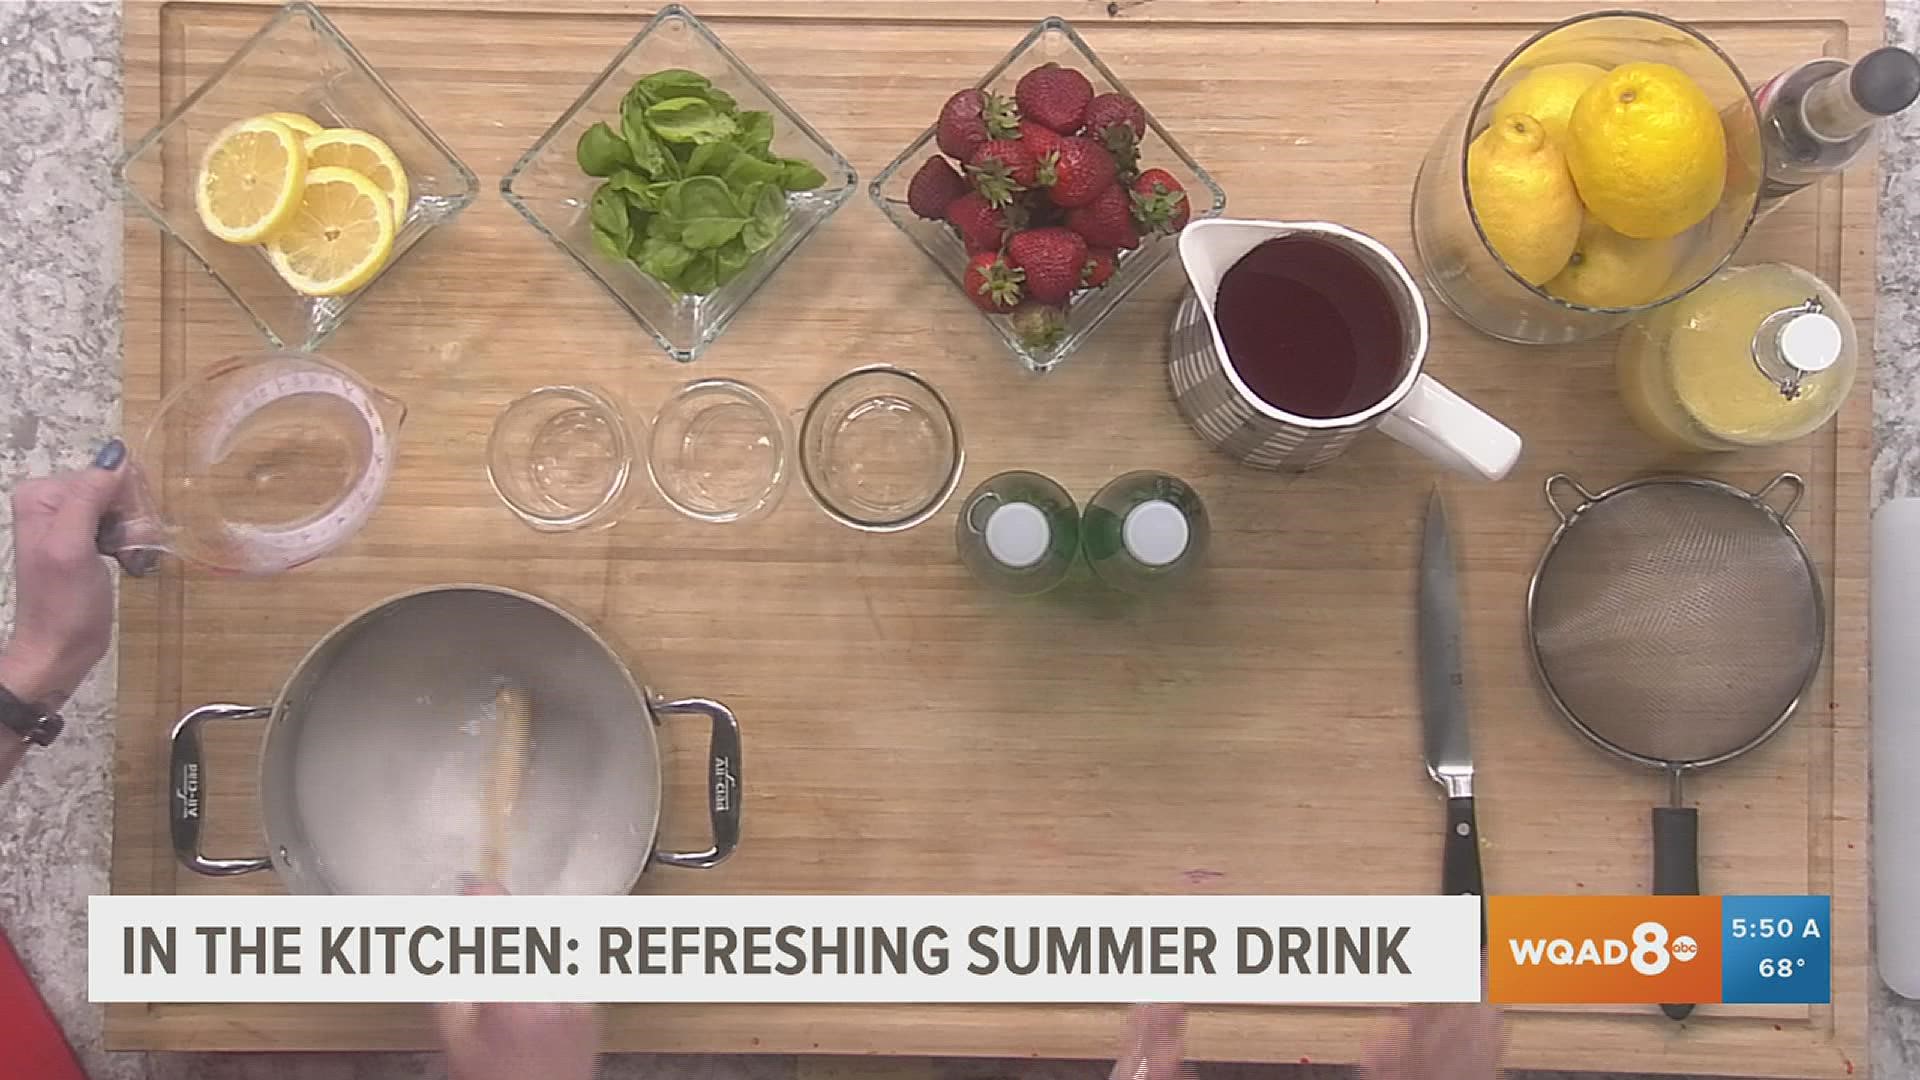 David mixes up a refreshing summer beverage to celebrate the start of JDC!